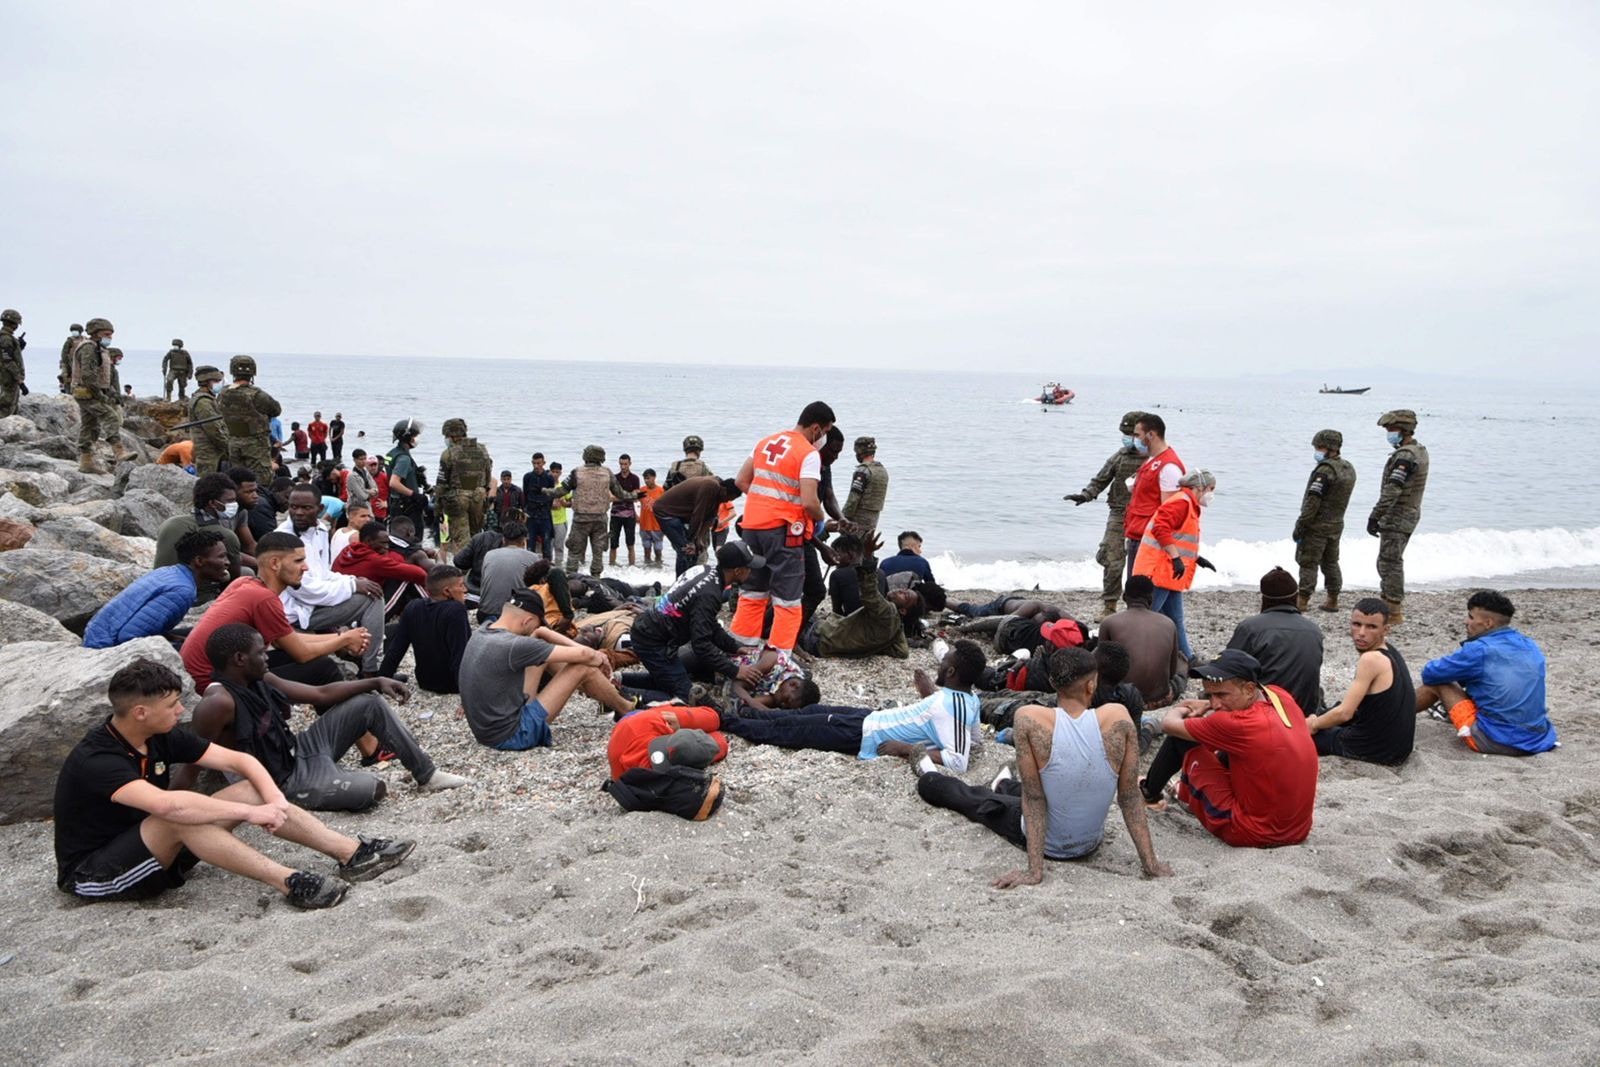 Red Cross members assist migrants who arrived swimming at the Spanish enclave of Ceuta as Spanish soldiers and Guardia Civil members stand guard on May 18, 2021 in Ceuta. - Spain has returned to Morocco nearly half of the 6,000 migrants who entered its Ceuta enclave, as hundreds more tried to enter its other north African territory. (Photo by Antonio Sempere / AFP) - AFP